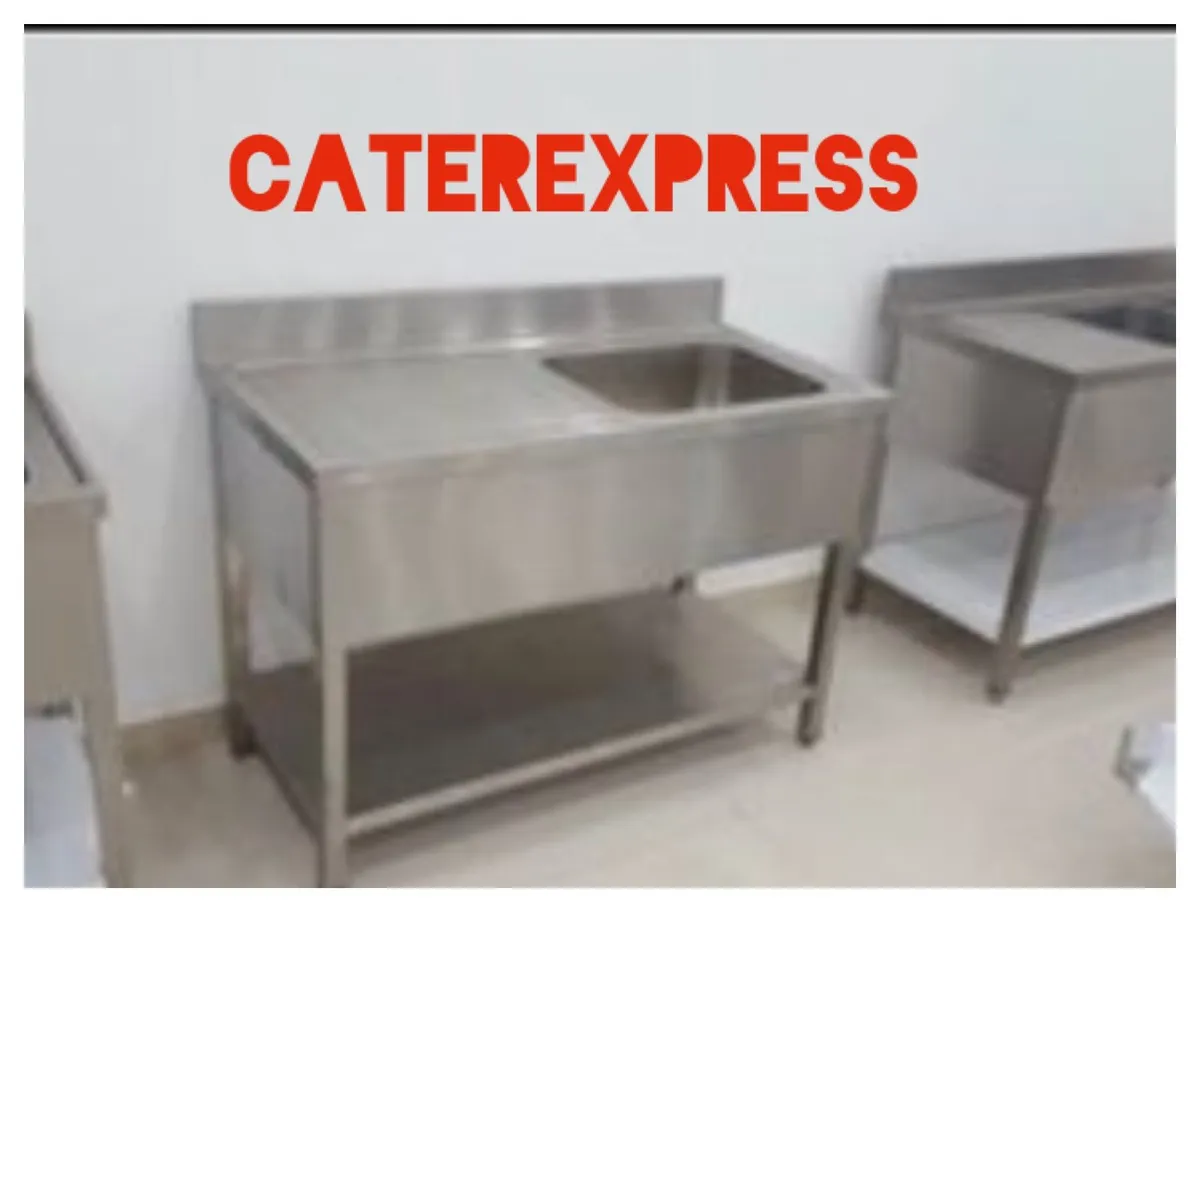 Caterexpress Carlow Sinks and tables frytac